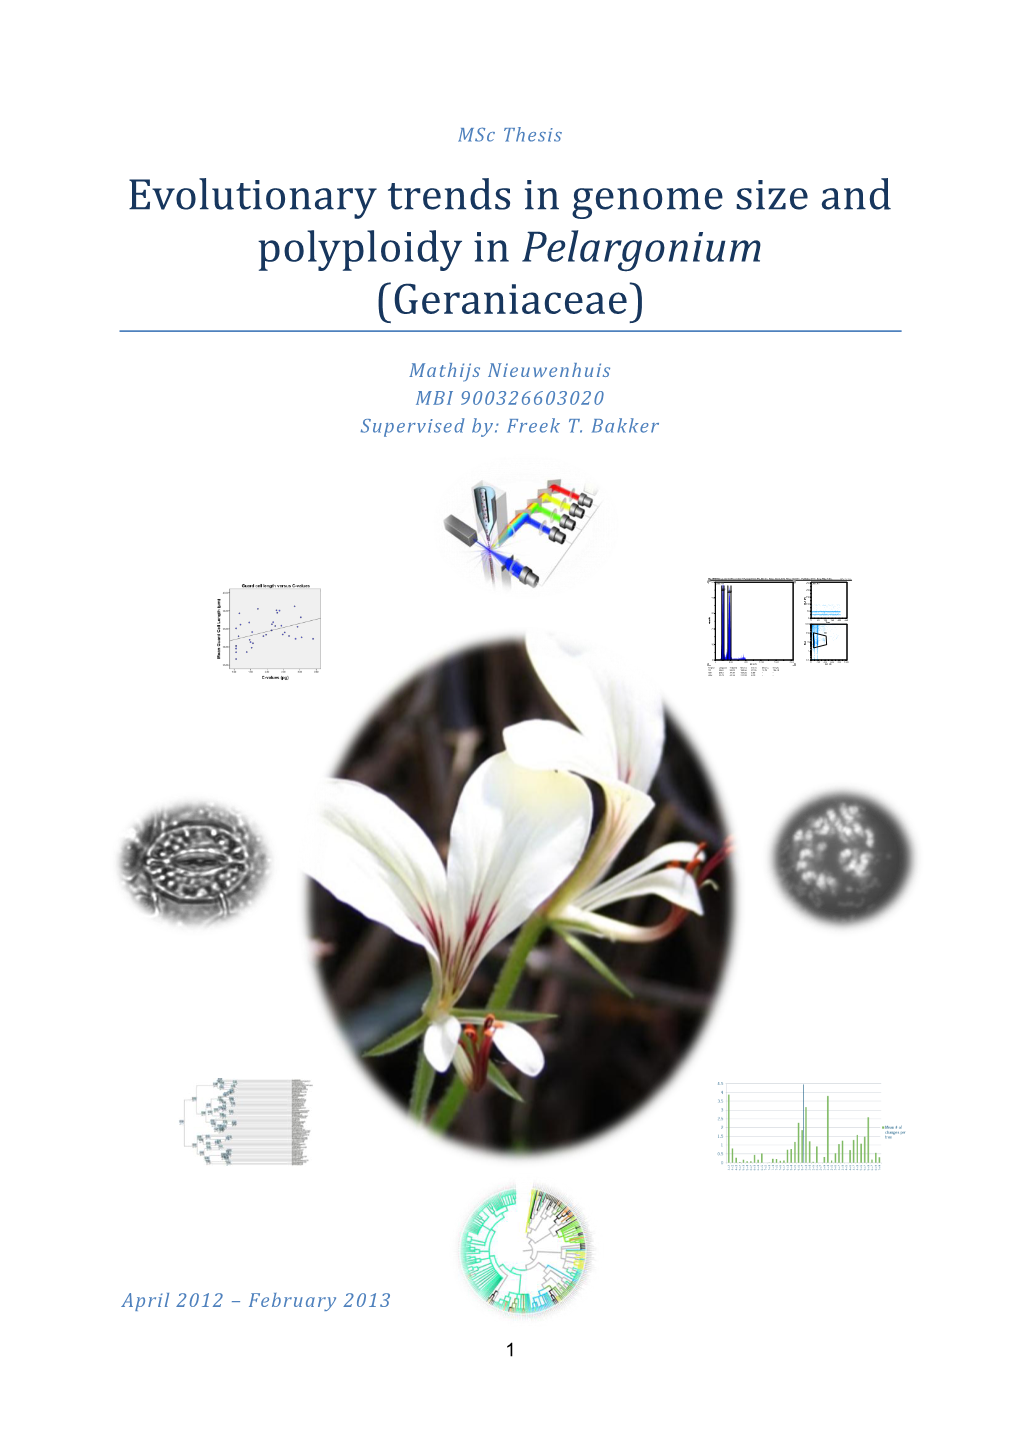 Msc Thesis Evolutionary Trends in Genome Size and Polyploidy in Pelargonium (Geraniaceae)